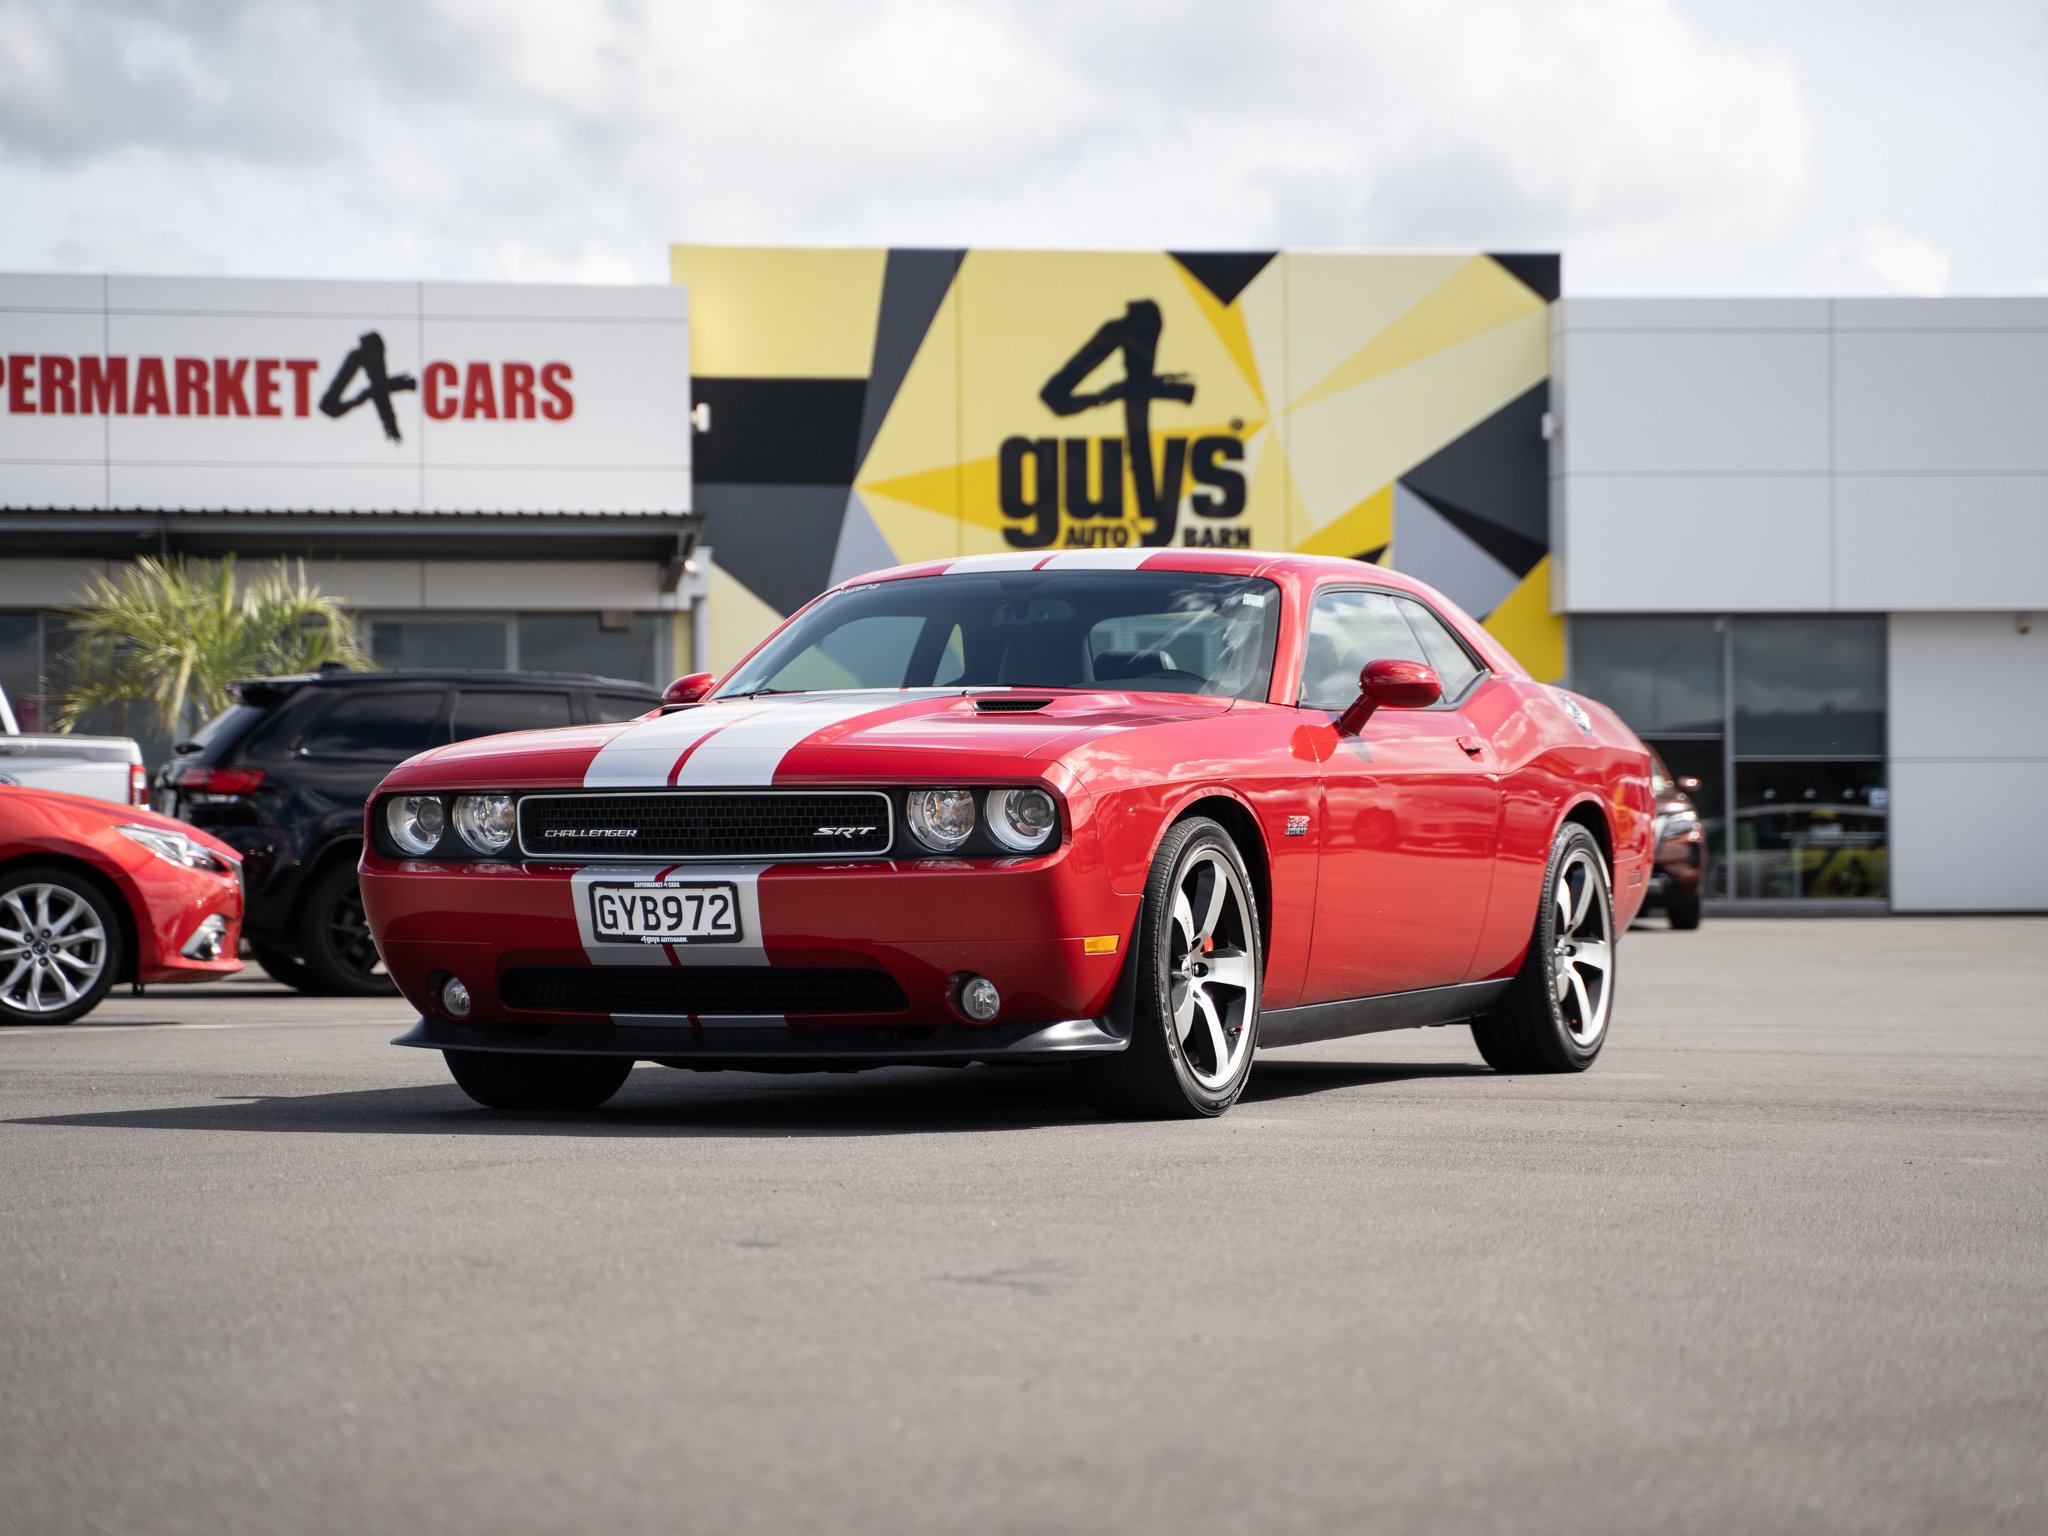 Who's a fan of manual Mopars? Just Arrived! This 2012 Dodge Challenger SRT8 (392) is a true gem for enthusiasts!

At only $69,950 NZD! Come see it before it speeds off!

#4Guys #NewZealand #ManualMopar #DodgeChallengerSRT8 #MuscleCarMagic